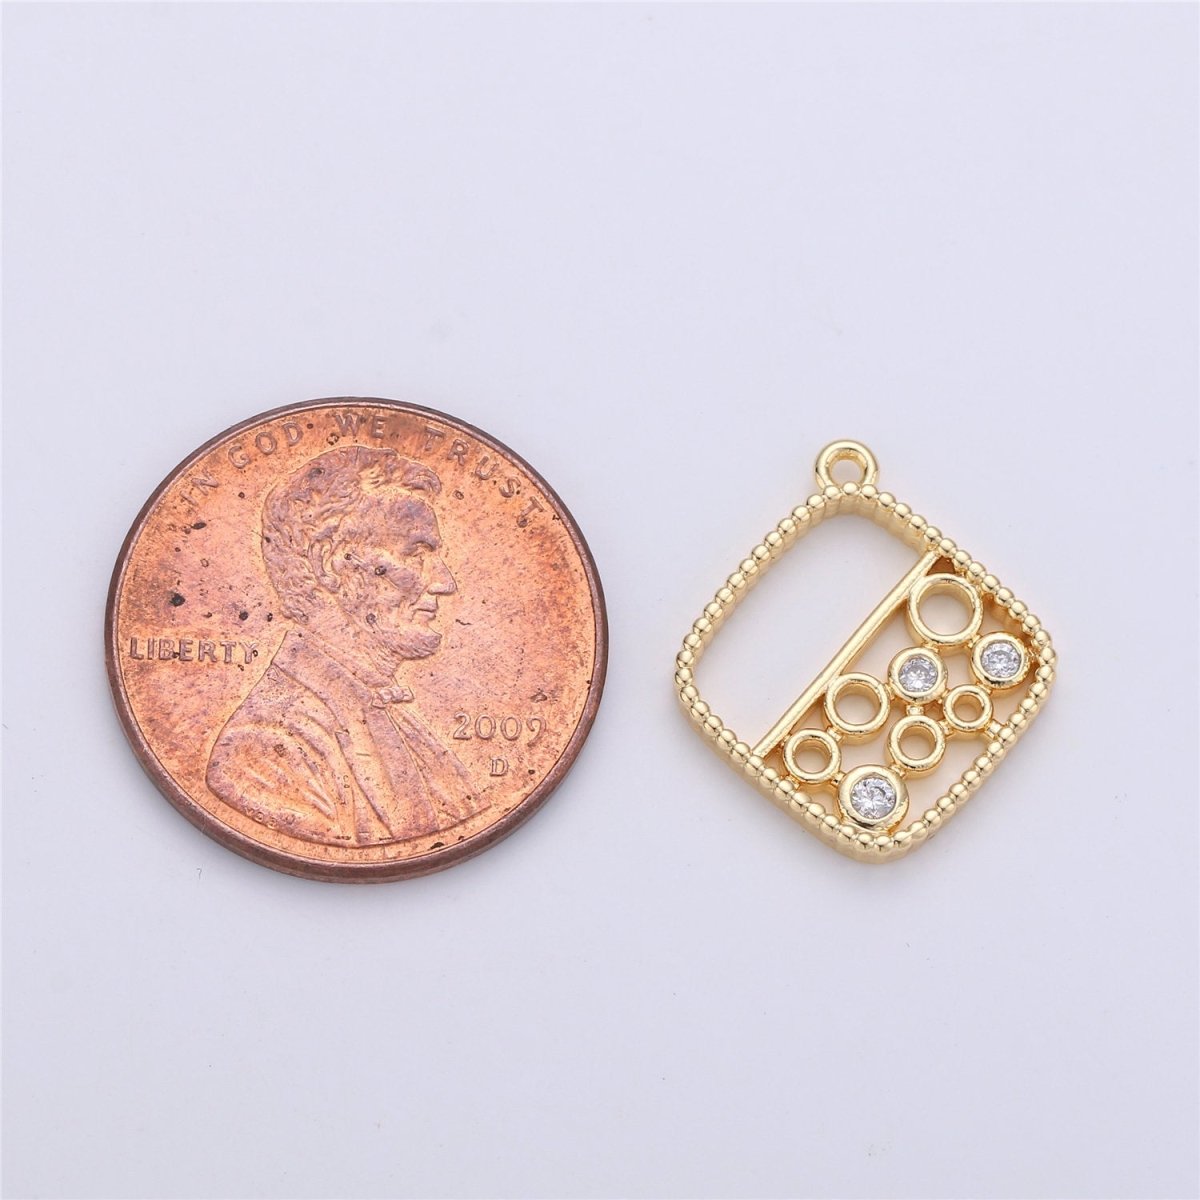 Dainty Geometric Charm Gold Square Charm with Bubble Circle in Cubic Charm for Necklace Earring Bracelet Charm supply, K-146 - DLUXCA